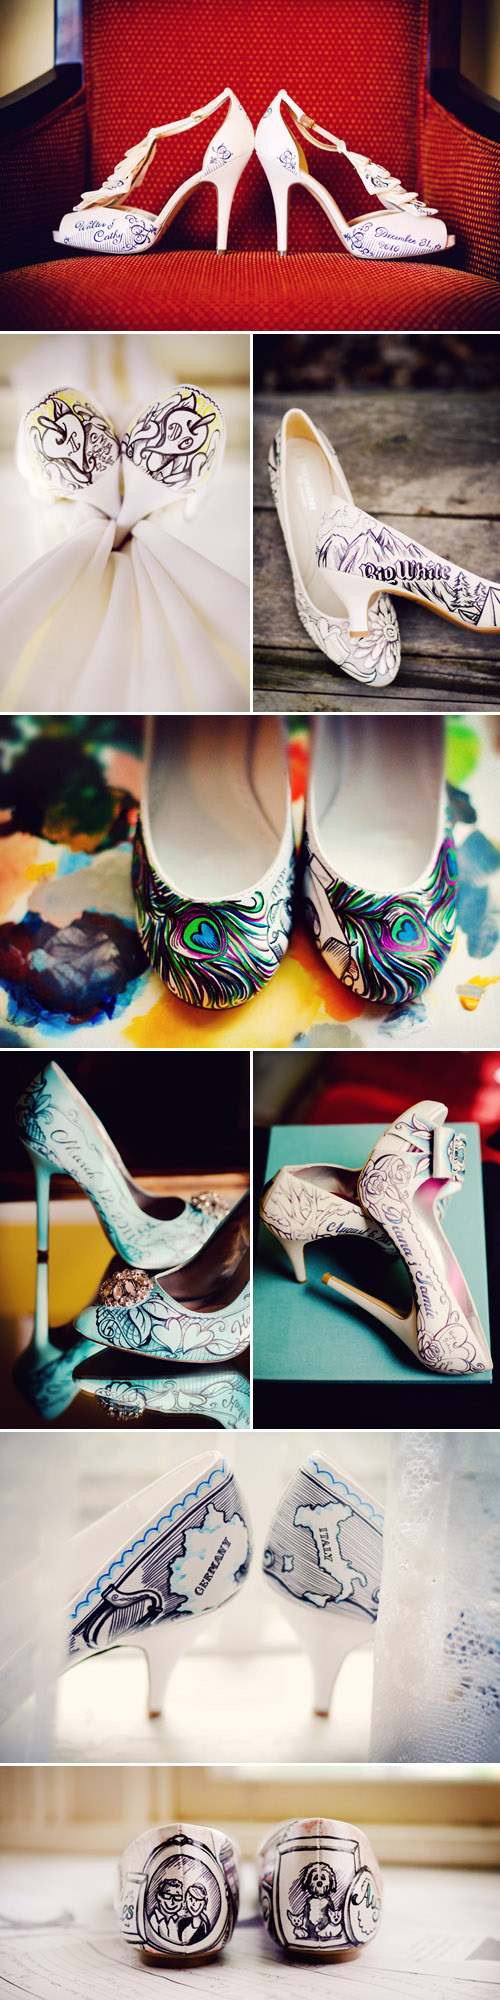 creative hand painted wedding shoes from Figgie Shoes, alternative wedding shoes